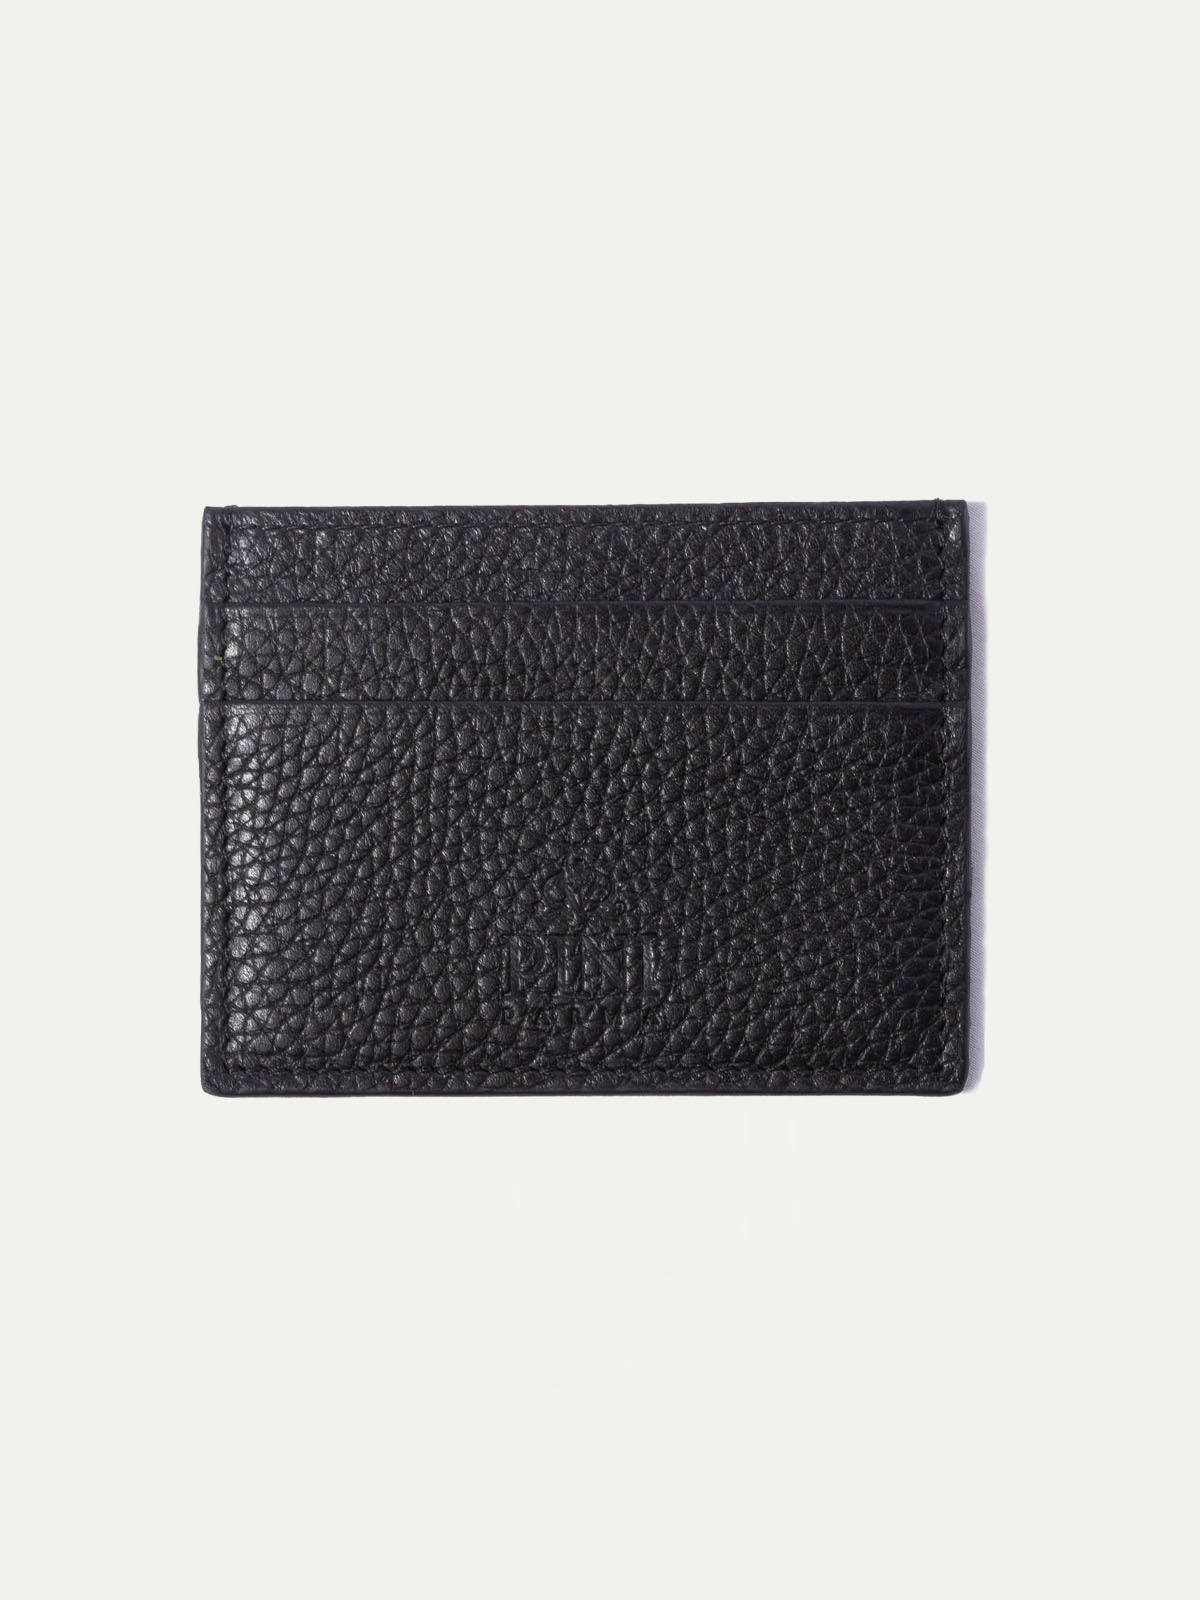 calf leather card holder, calf leather cardholder, black card holder, black cardholder, men leather card holder, men leather cardholder, porte-cartes en cuir, porte-cartes noir, porte-cartes noir en cuir, porte-cartes Italien, Italian leather cardholder, Italian leather card holder